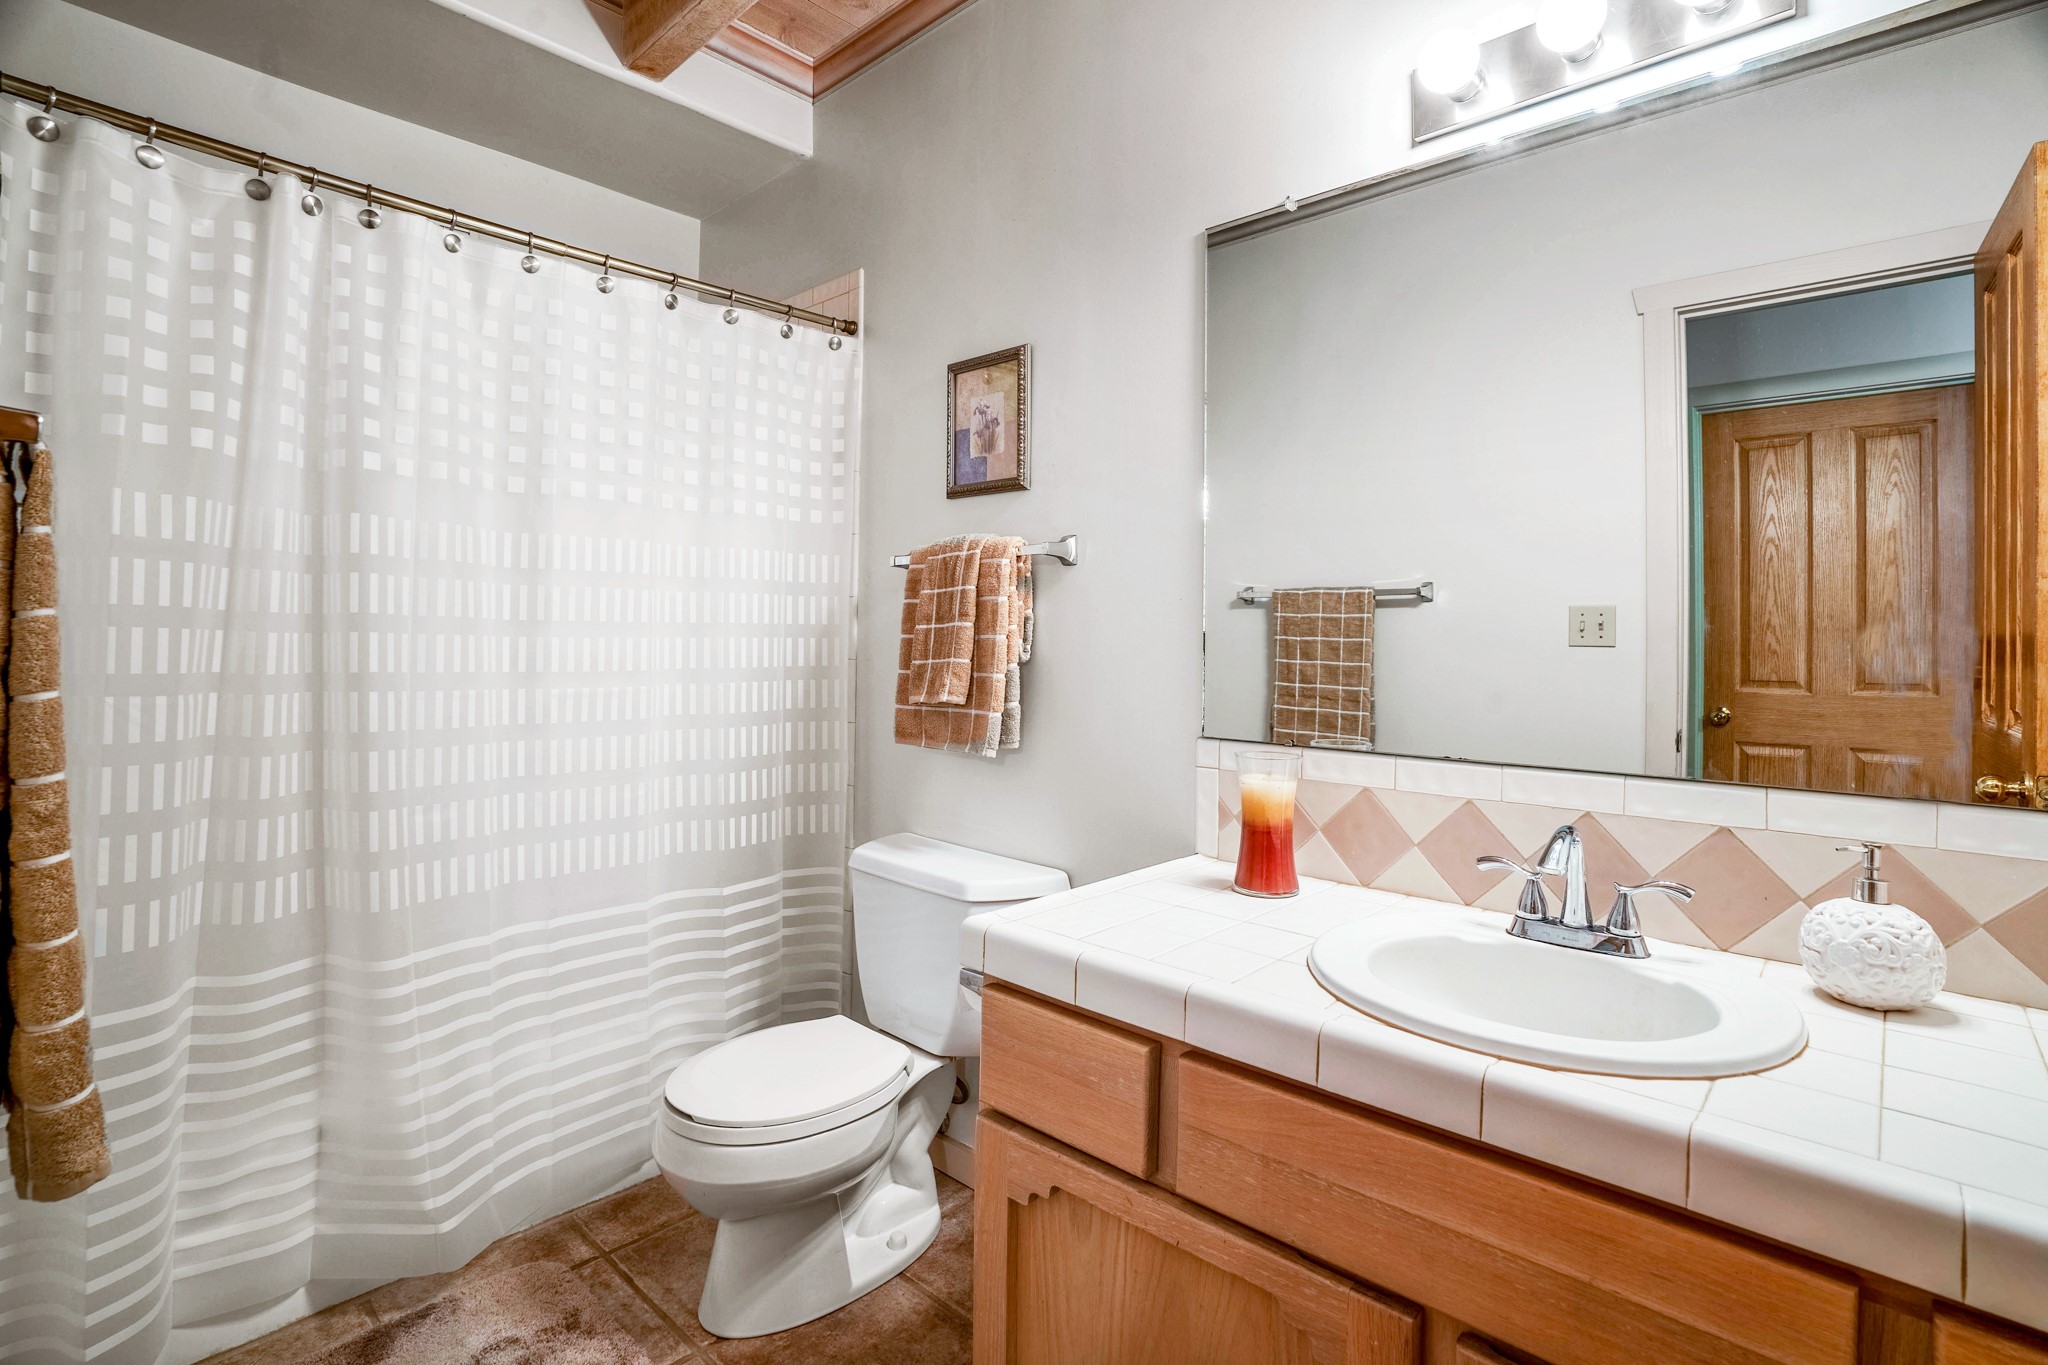 4186 Cheyenne Circle, Santa Fe, New Mexico 87507, 3 Bedrooms Bedrooms, ,2 BathroomsBathrooms,Residential,For Sale,4186 Cheyenne Circle,202232953